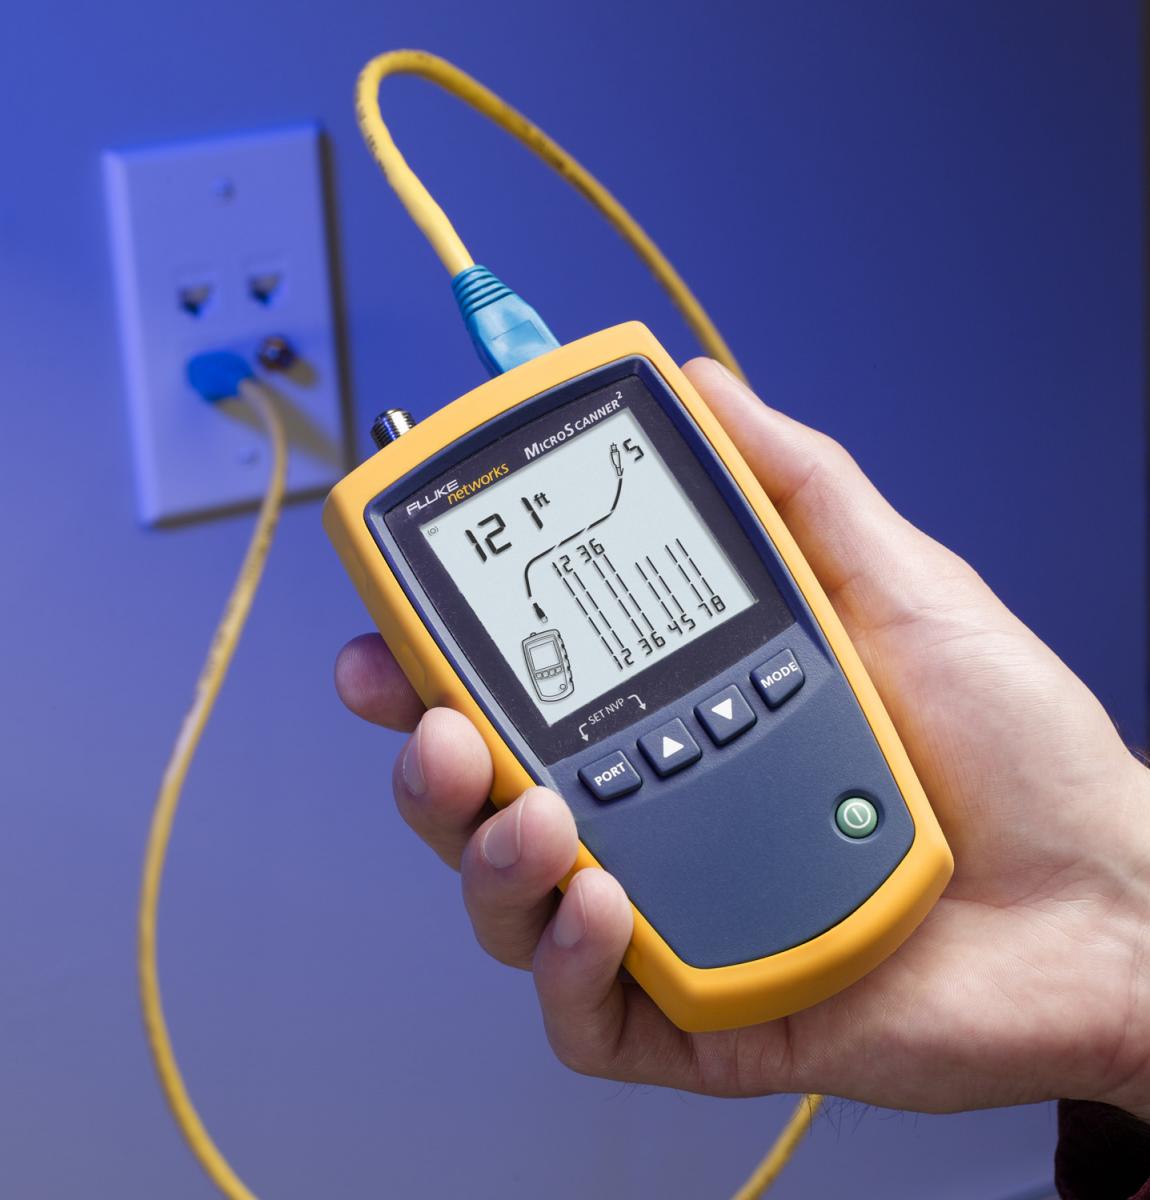 Test patchcords with MicroScanner cable tester